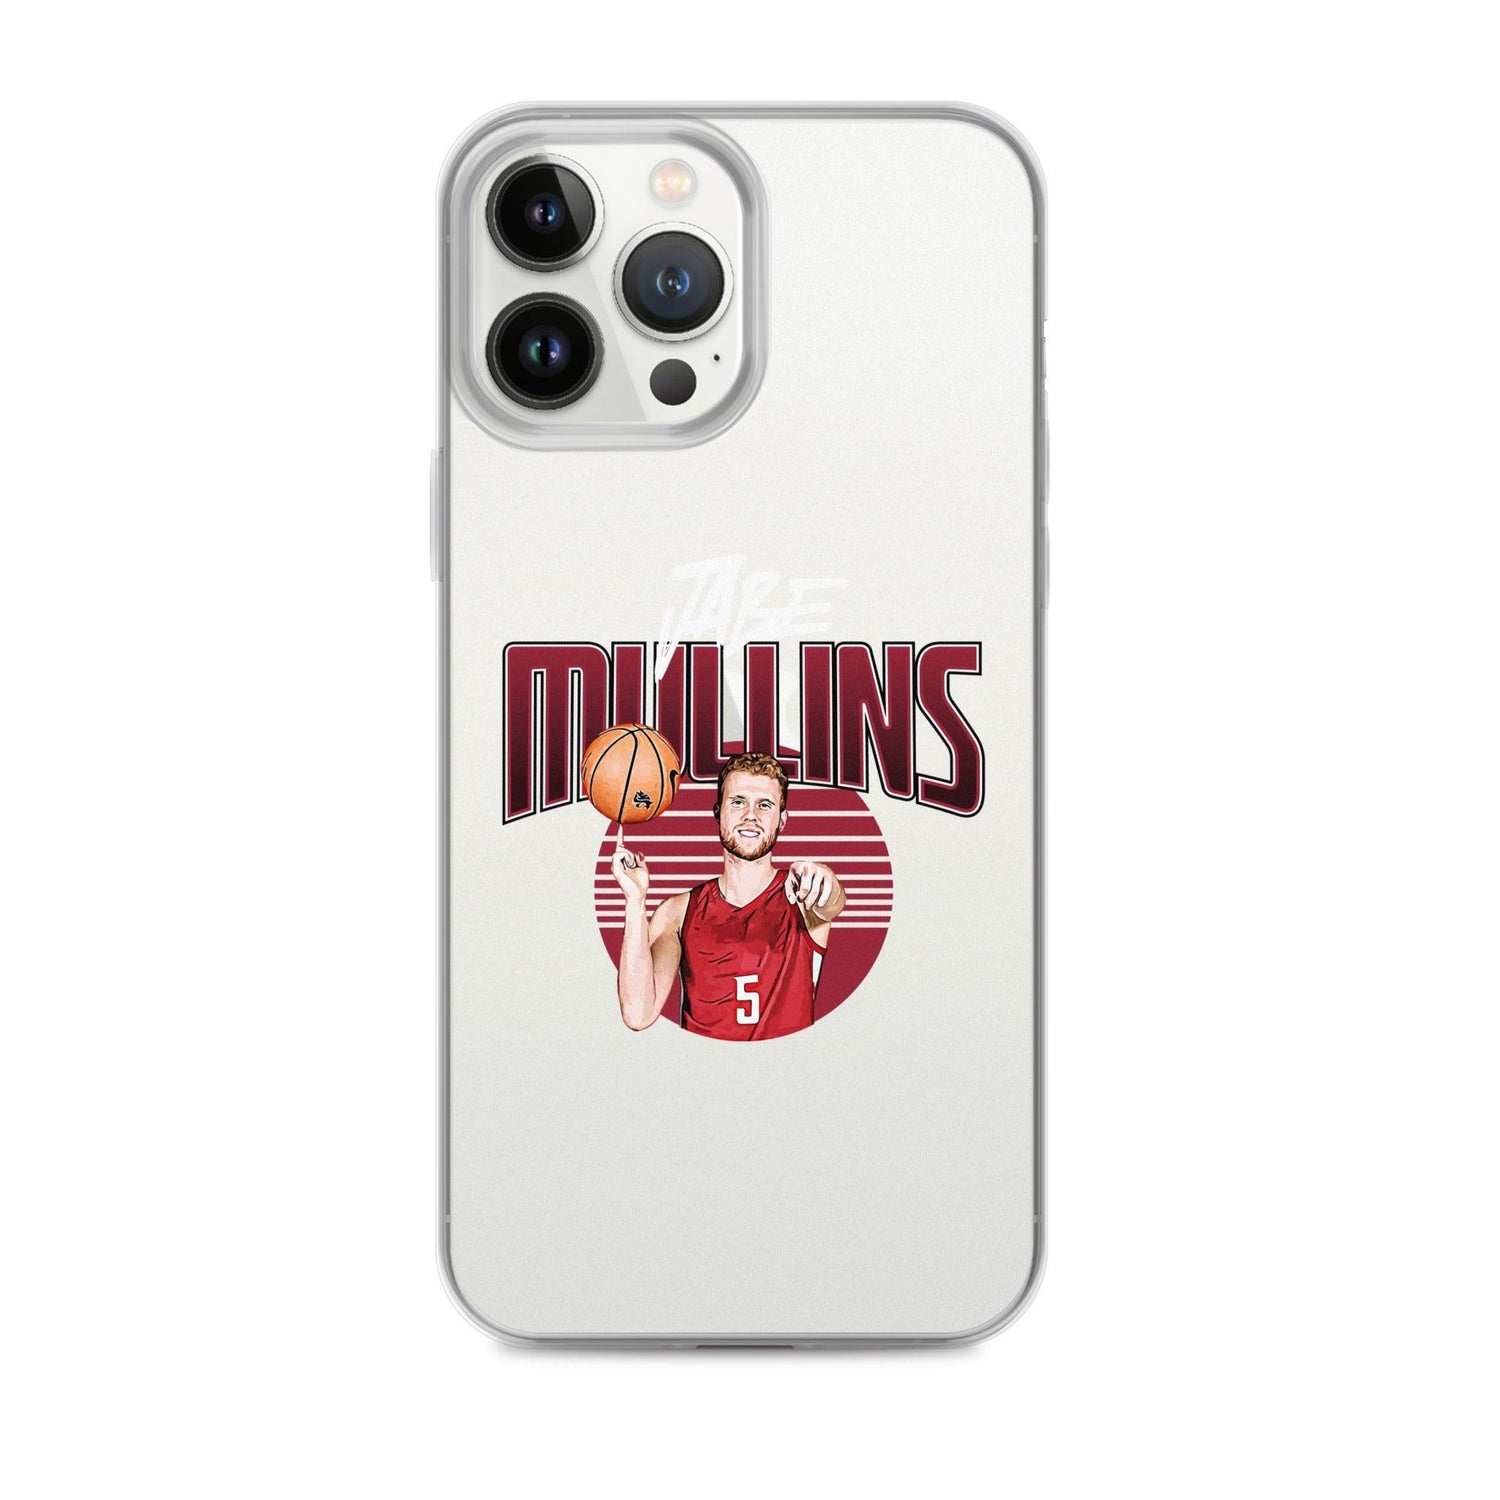 Jabe Mullins "Gameday" iPhone® - Fan Arch